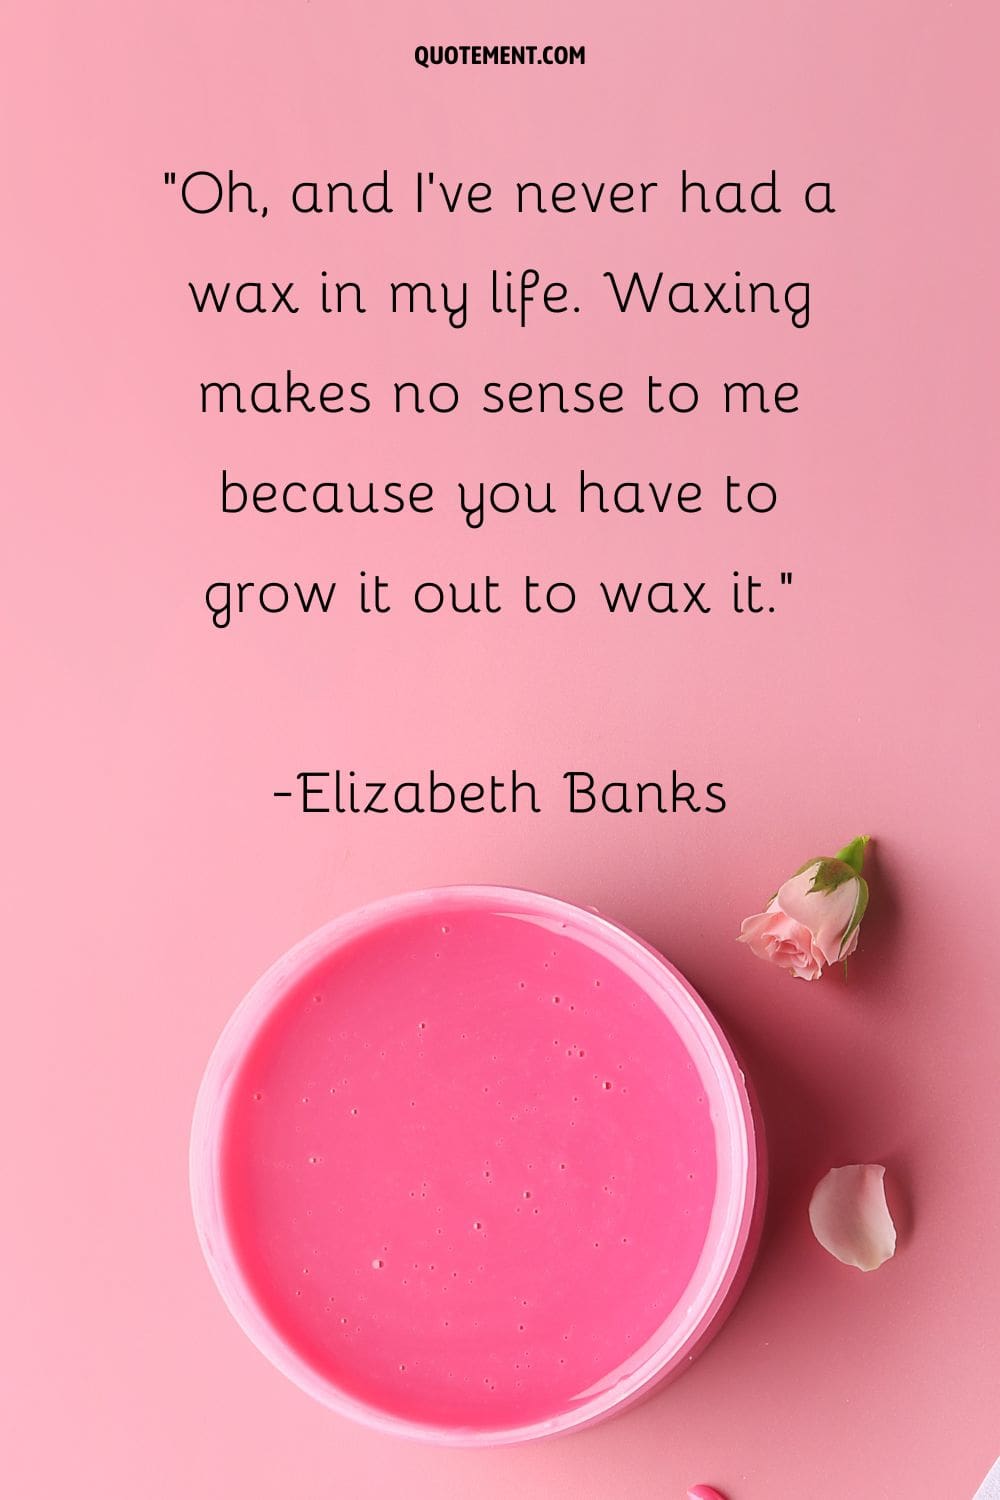 Oh, and I’ve never had a wax in my life. Waxing makes no sense to me because you have to grow it out to wax it